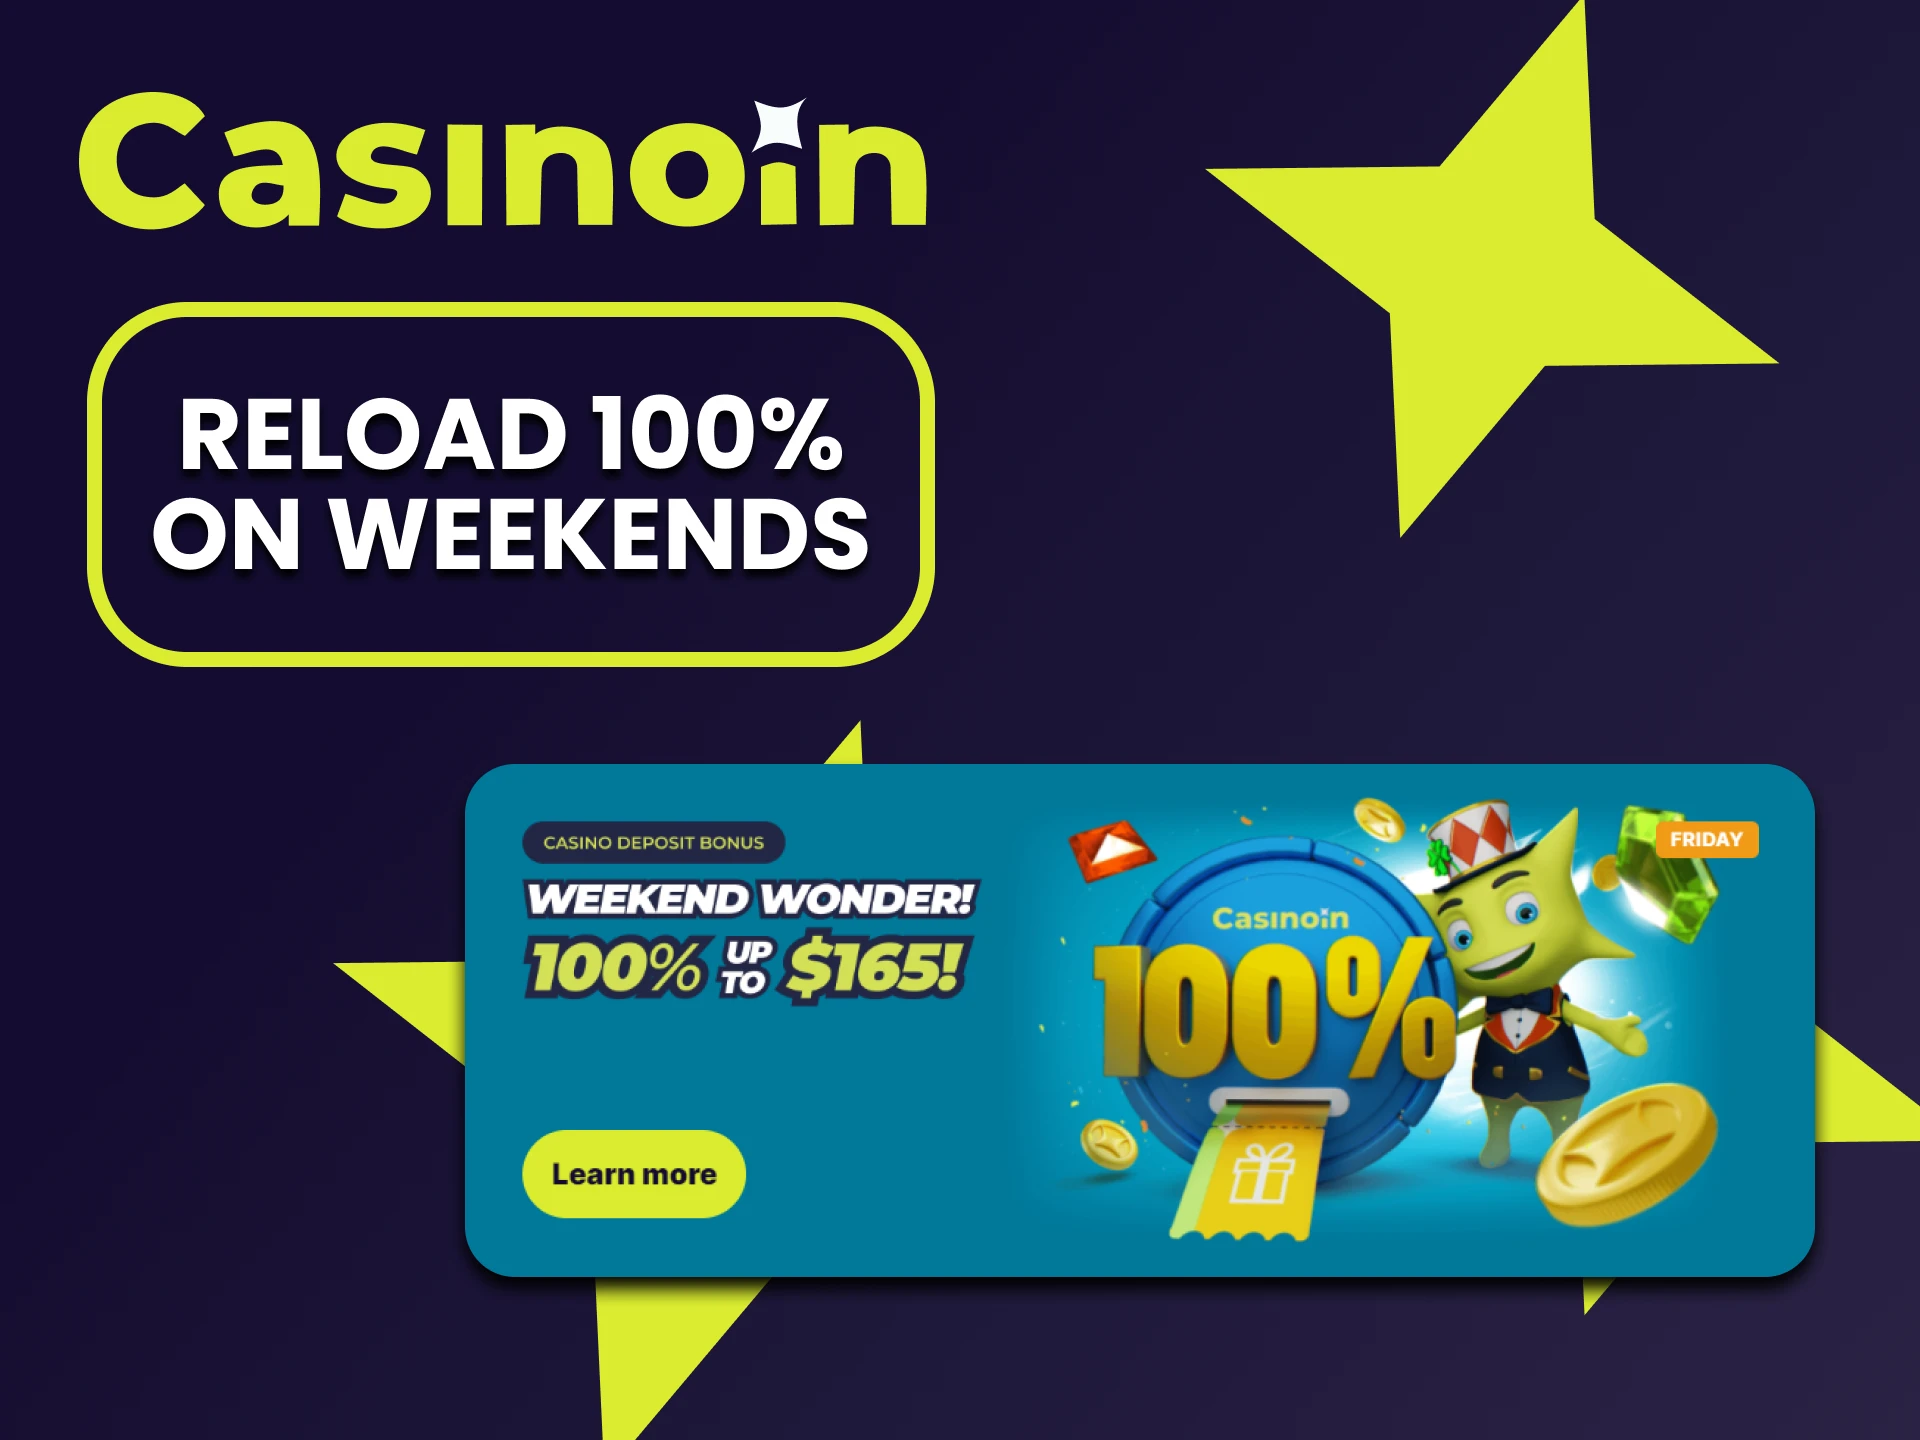 Get a weekly 100% Reload bonus from Casinoin.